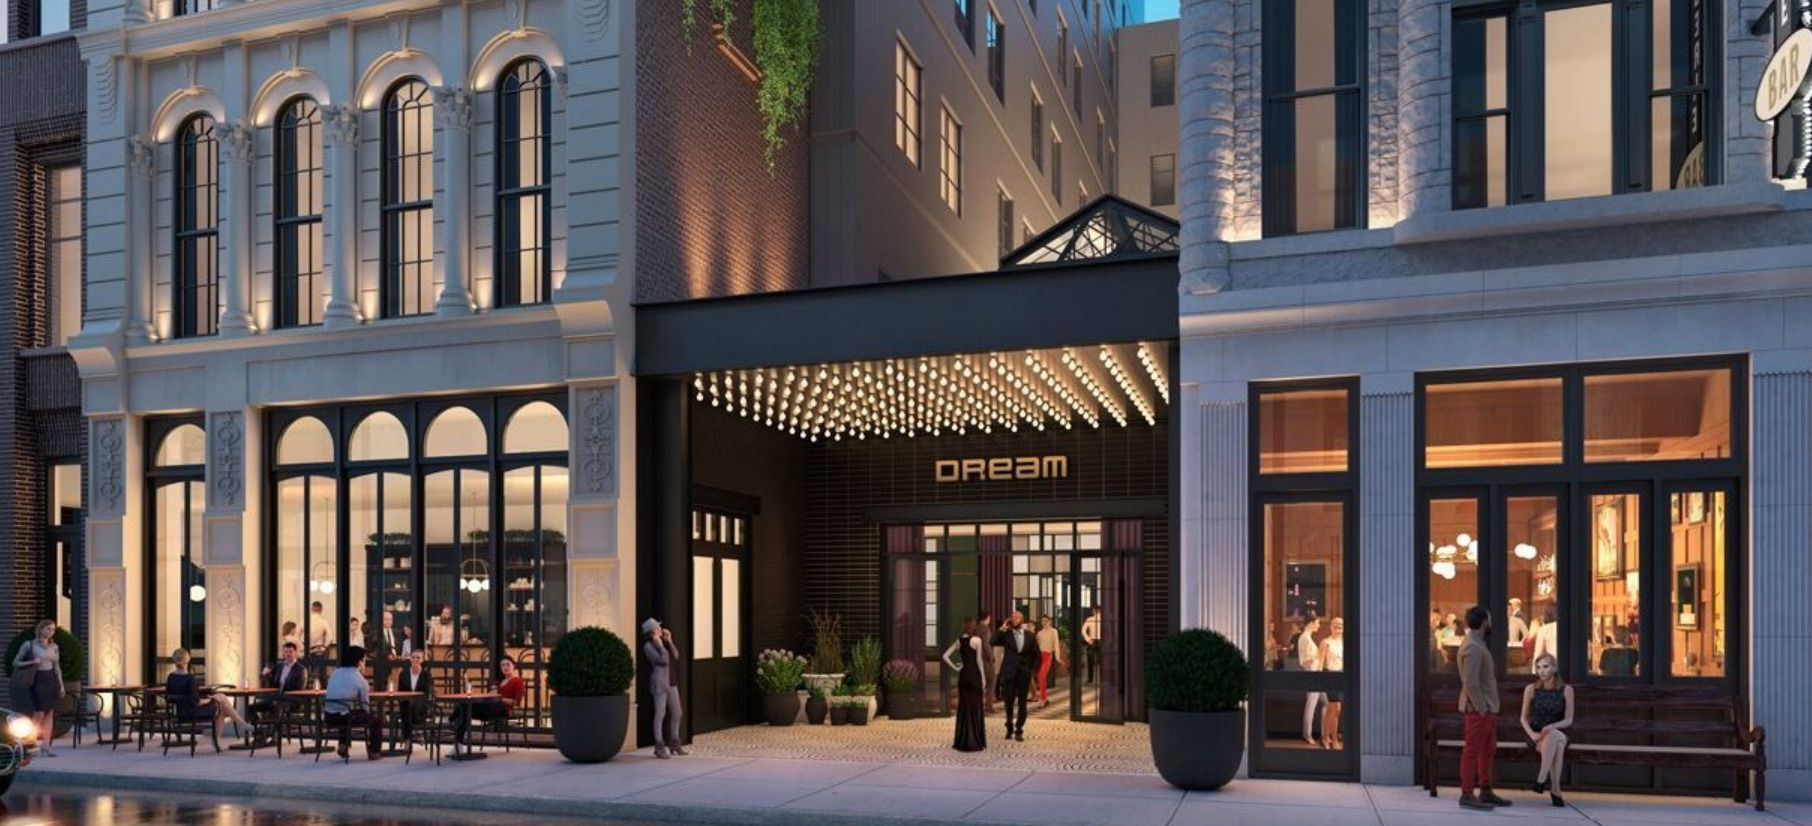 Dream Hotel Group appointed six hospitality executives to lead Dream Nashville its first location in Tennessee which is exp